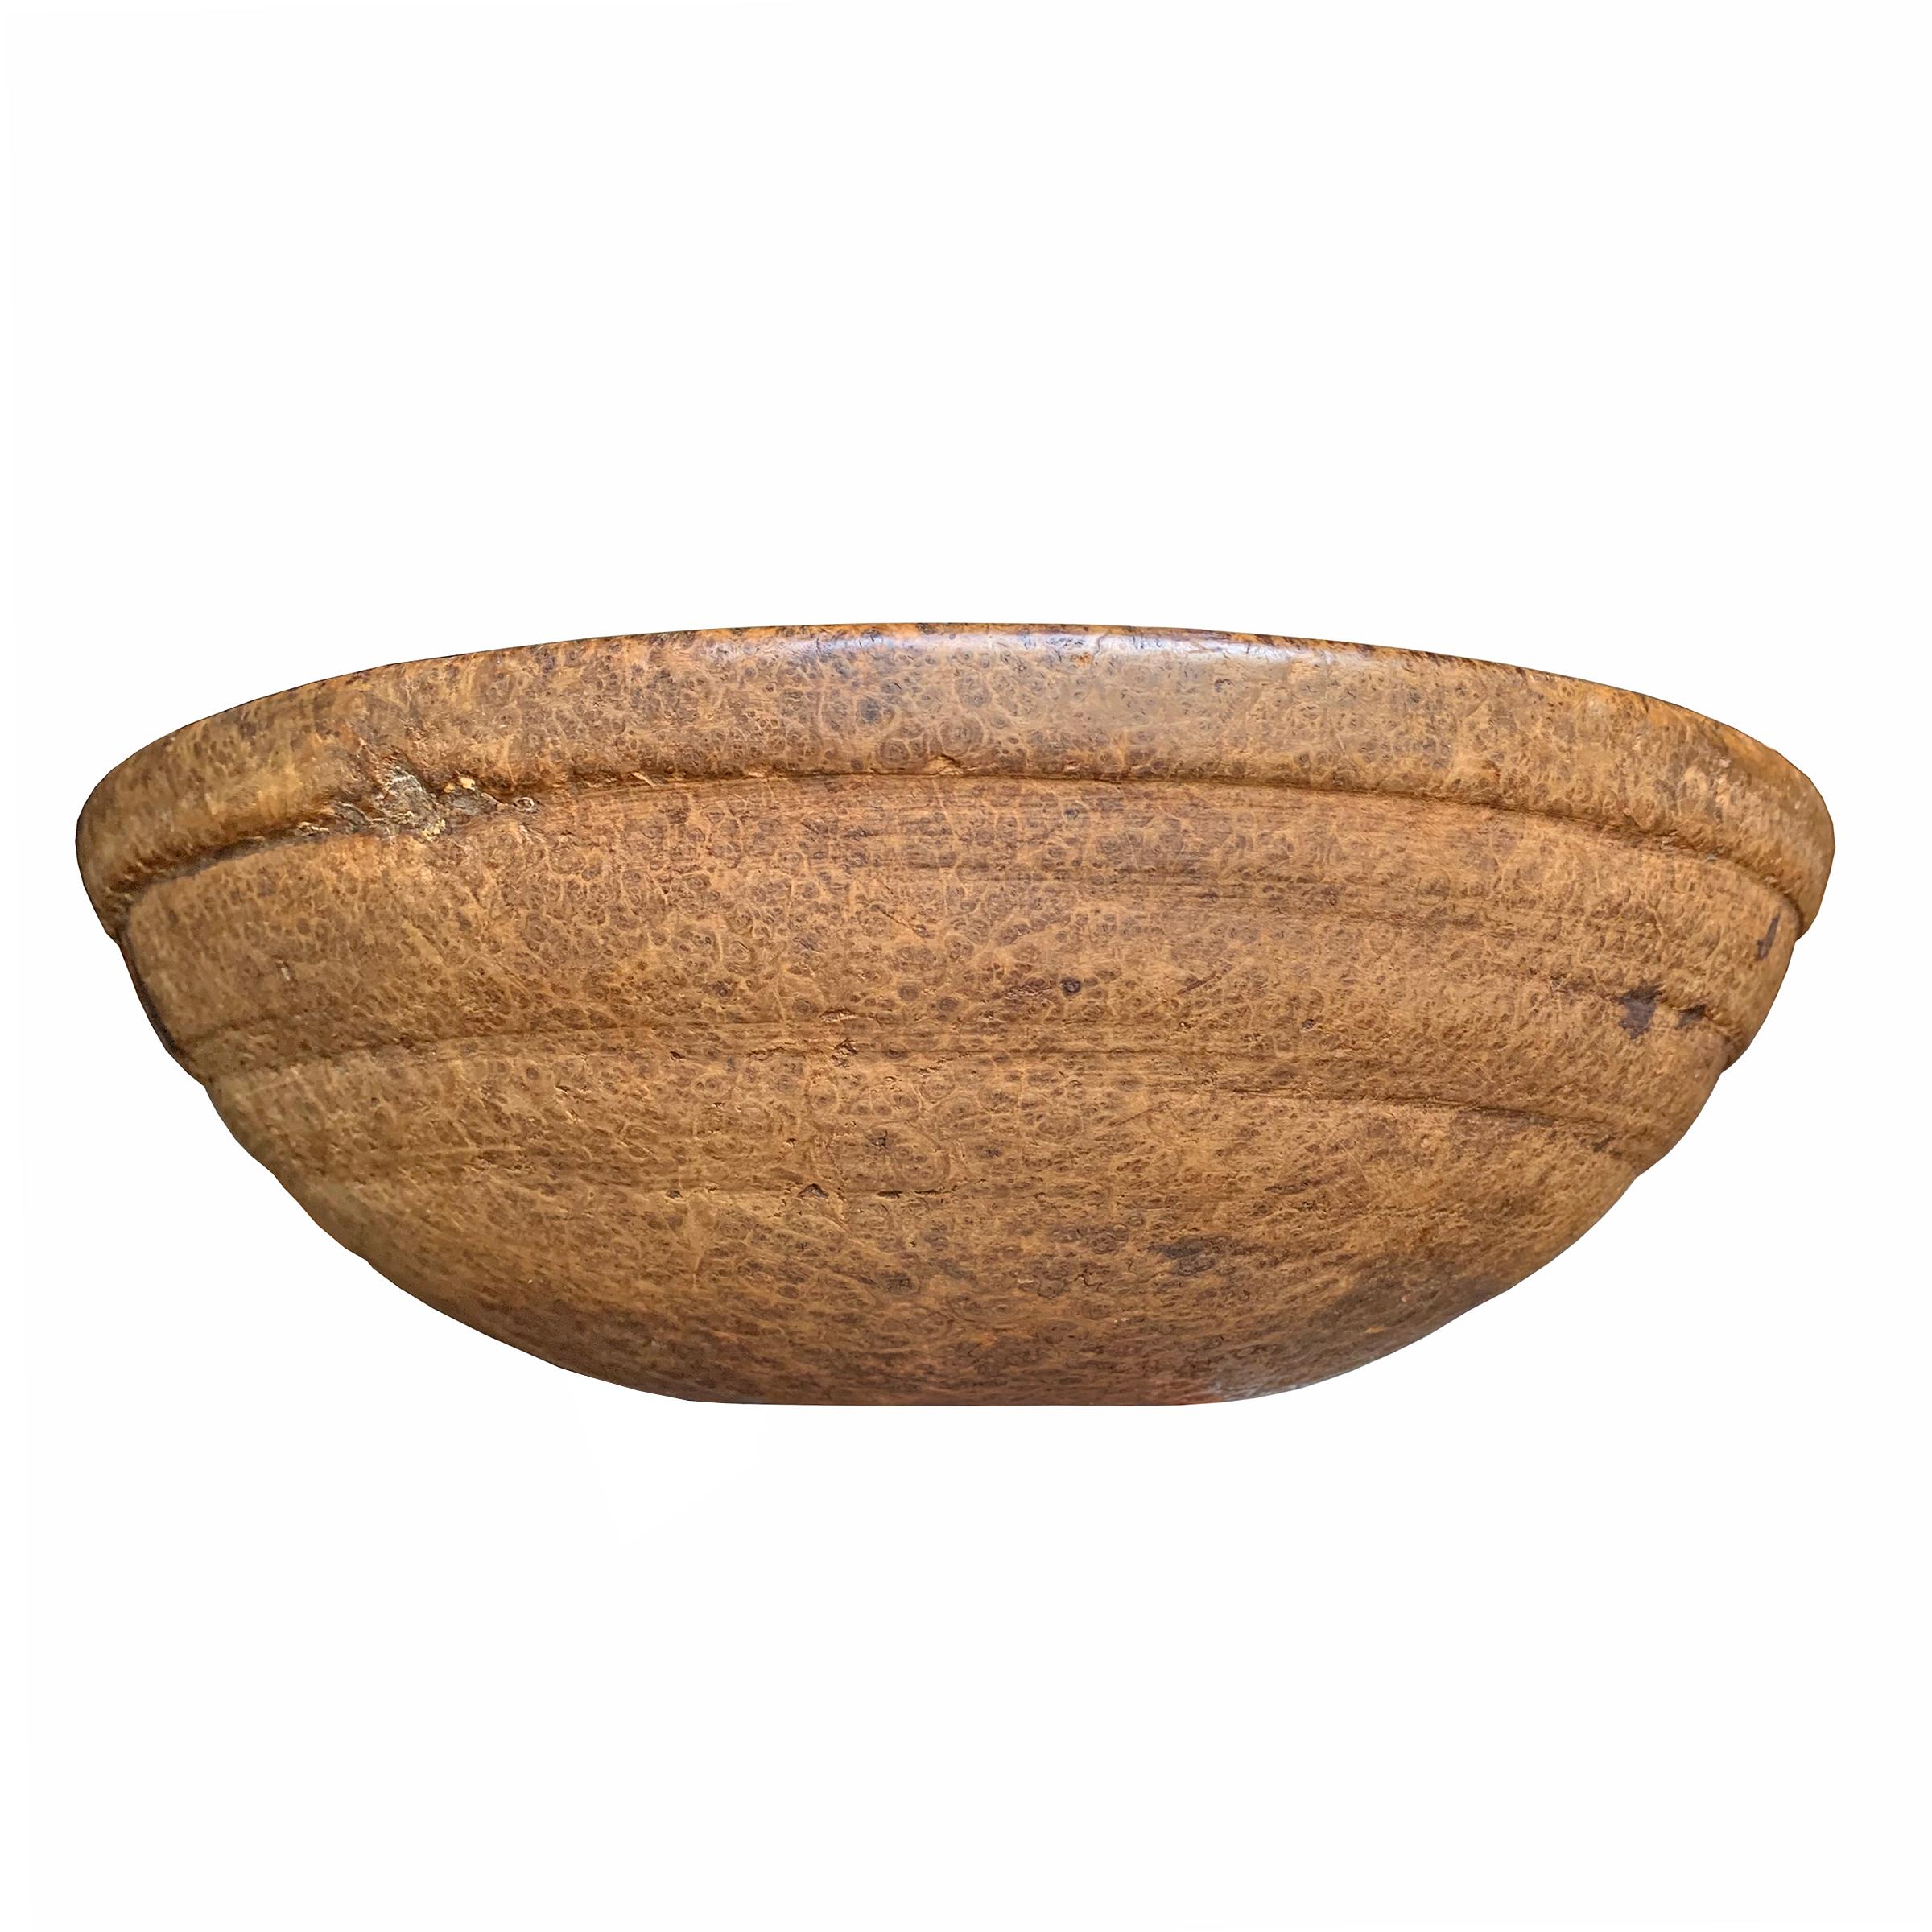 18th Century Early American Ash Burl Bowl For Sale 7